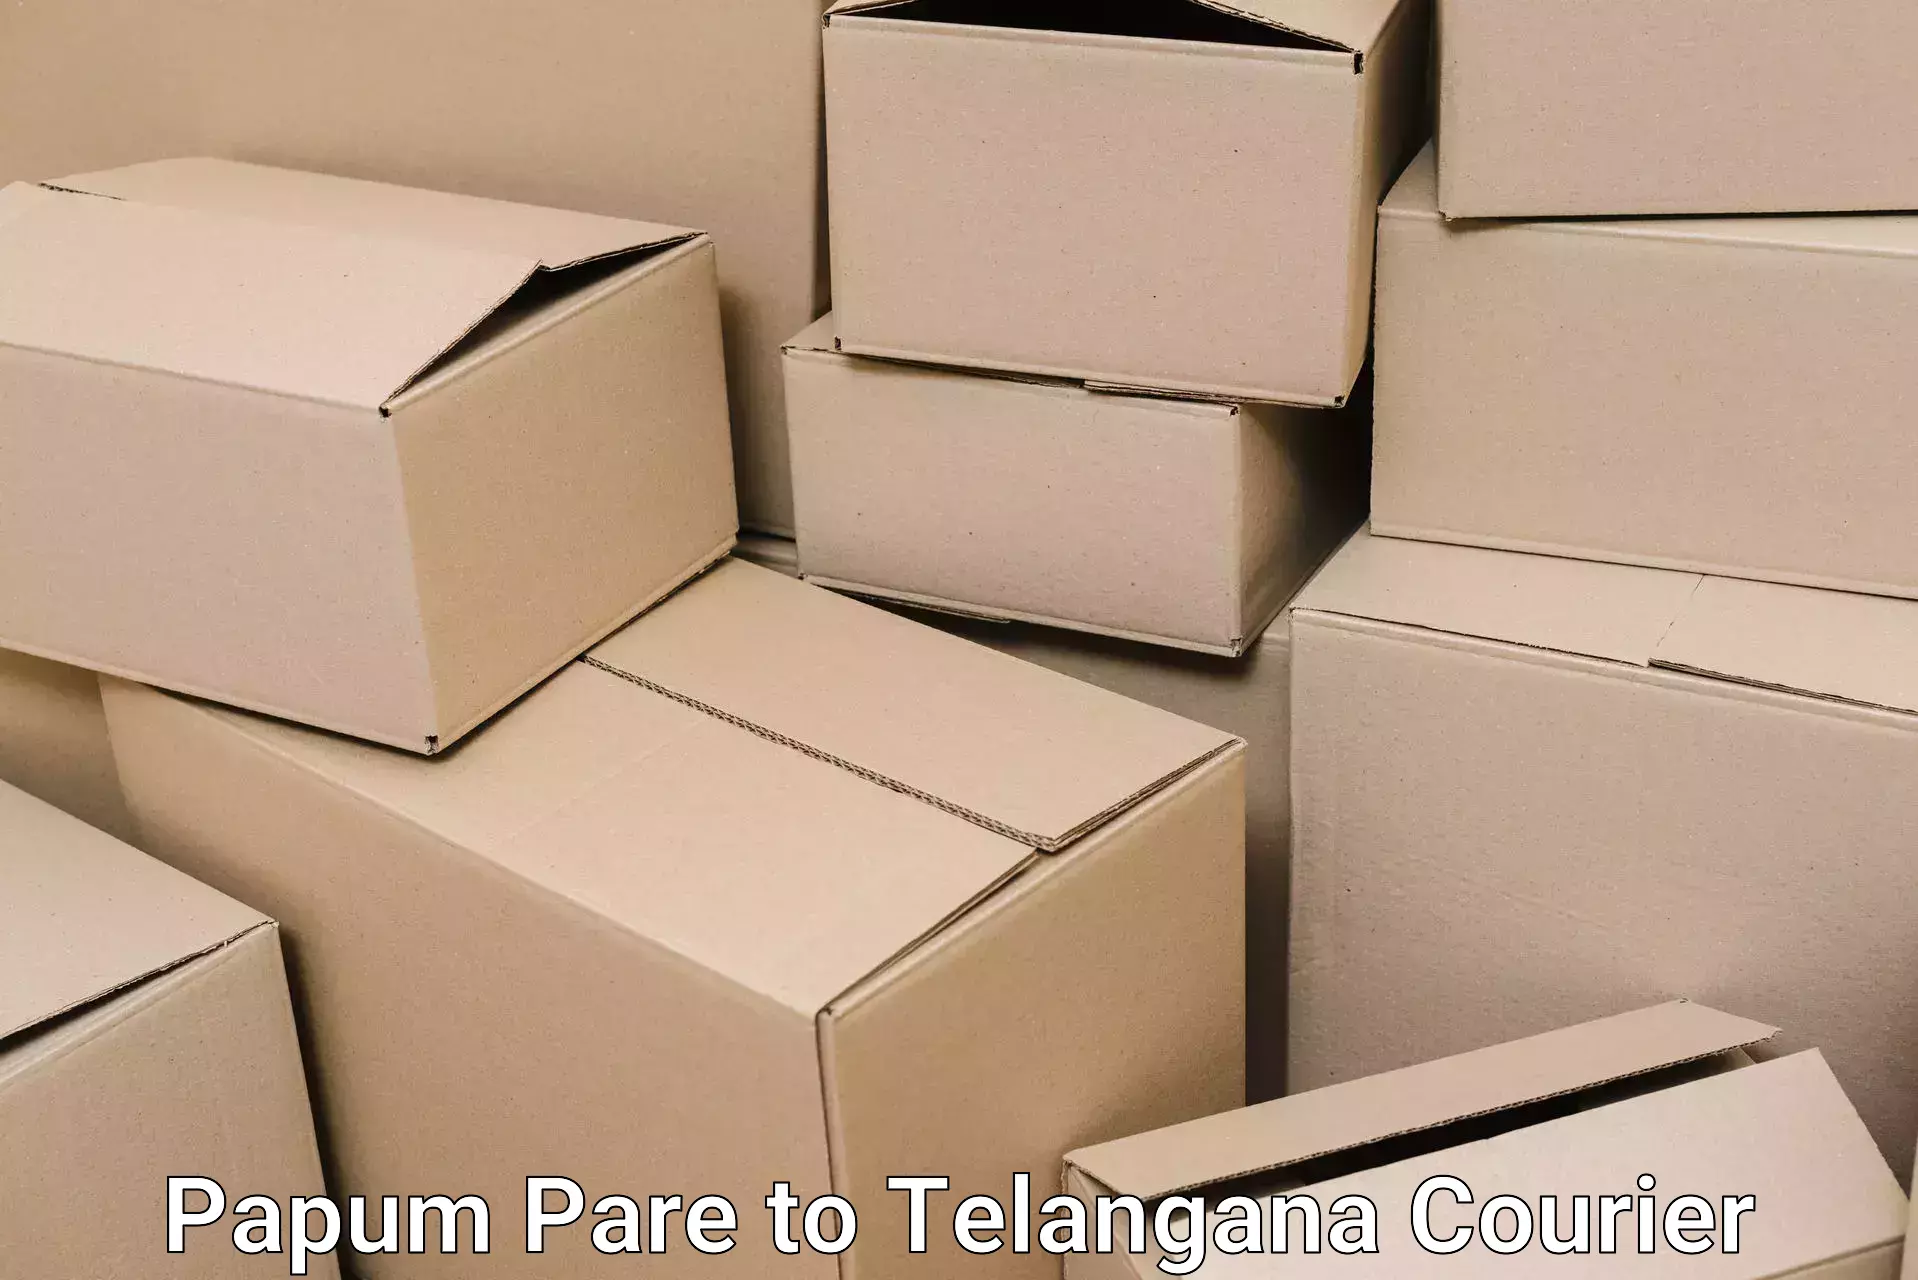 Professional packing and transport in Papum Pare to University of Hyderabad